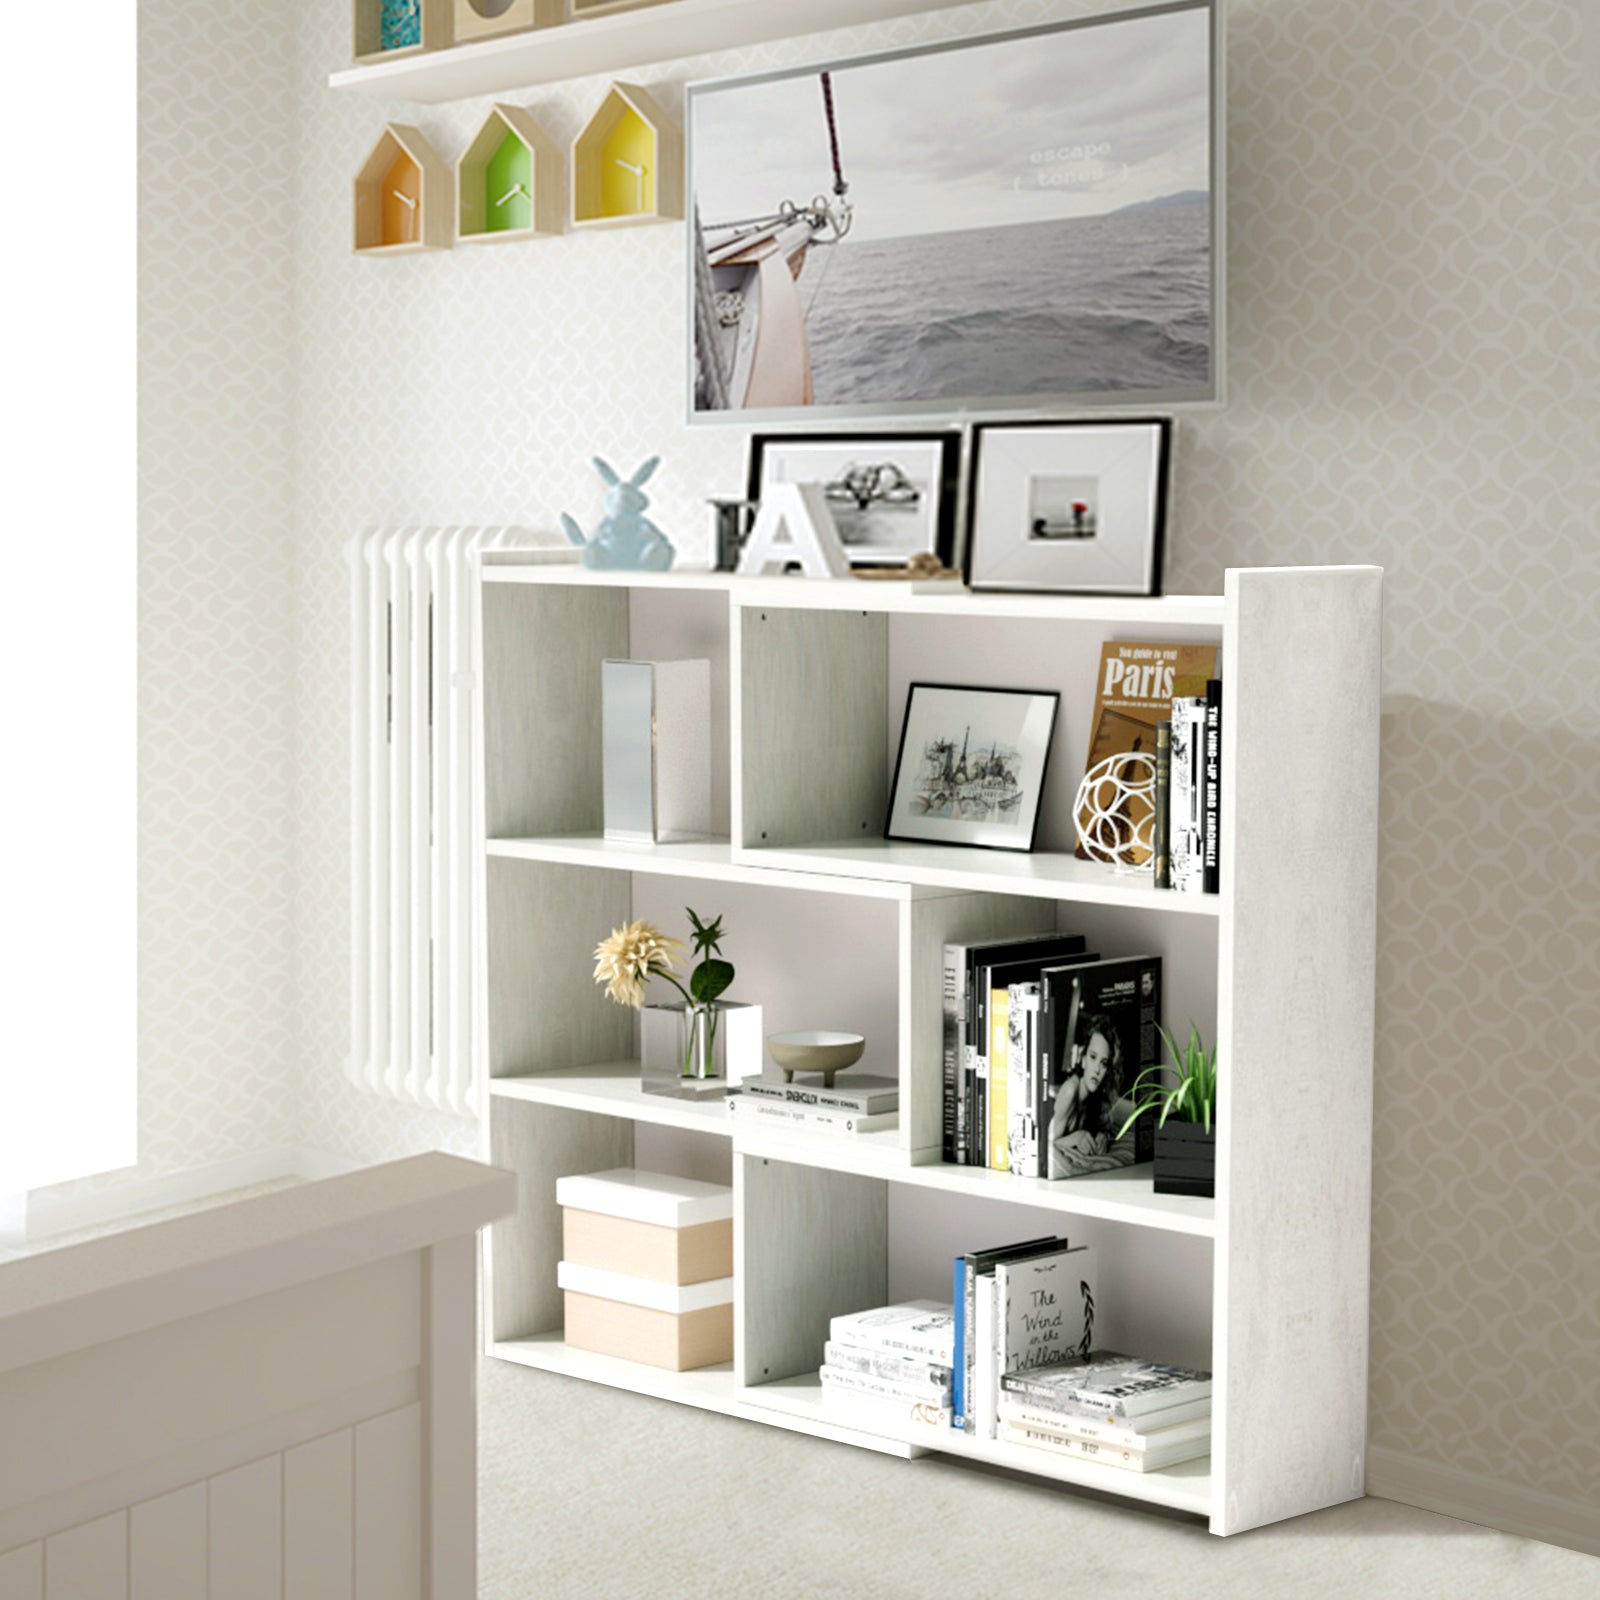 Styling Your Bookshelf: Transforming Functionality into Visual Delight